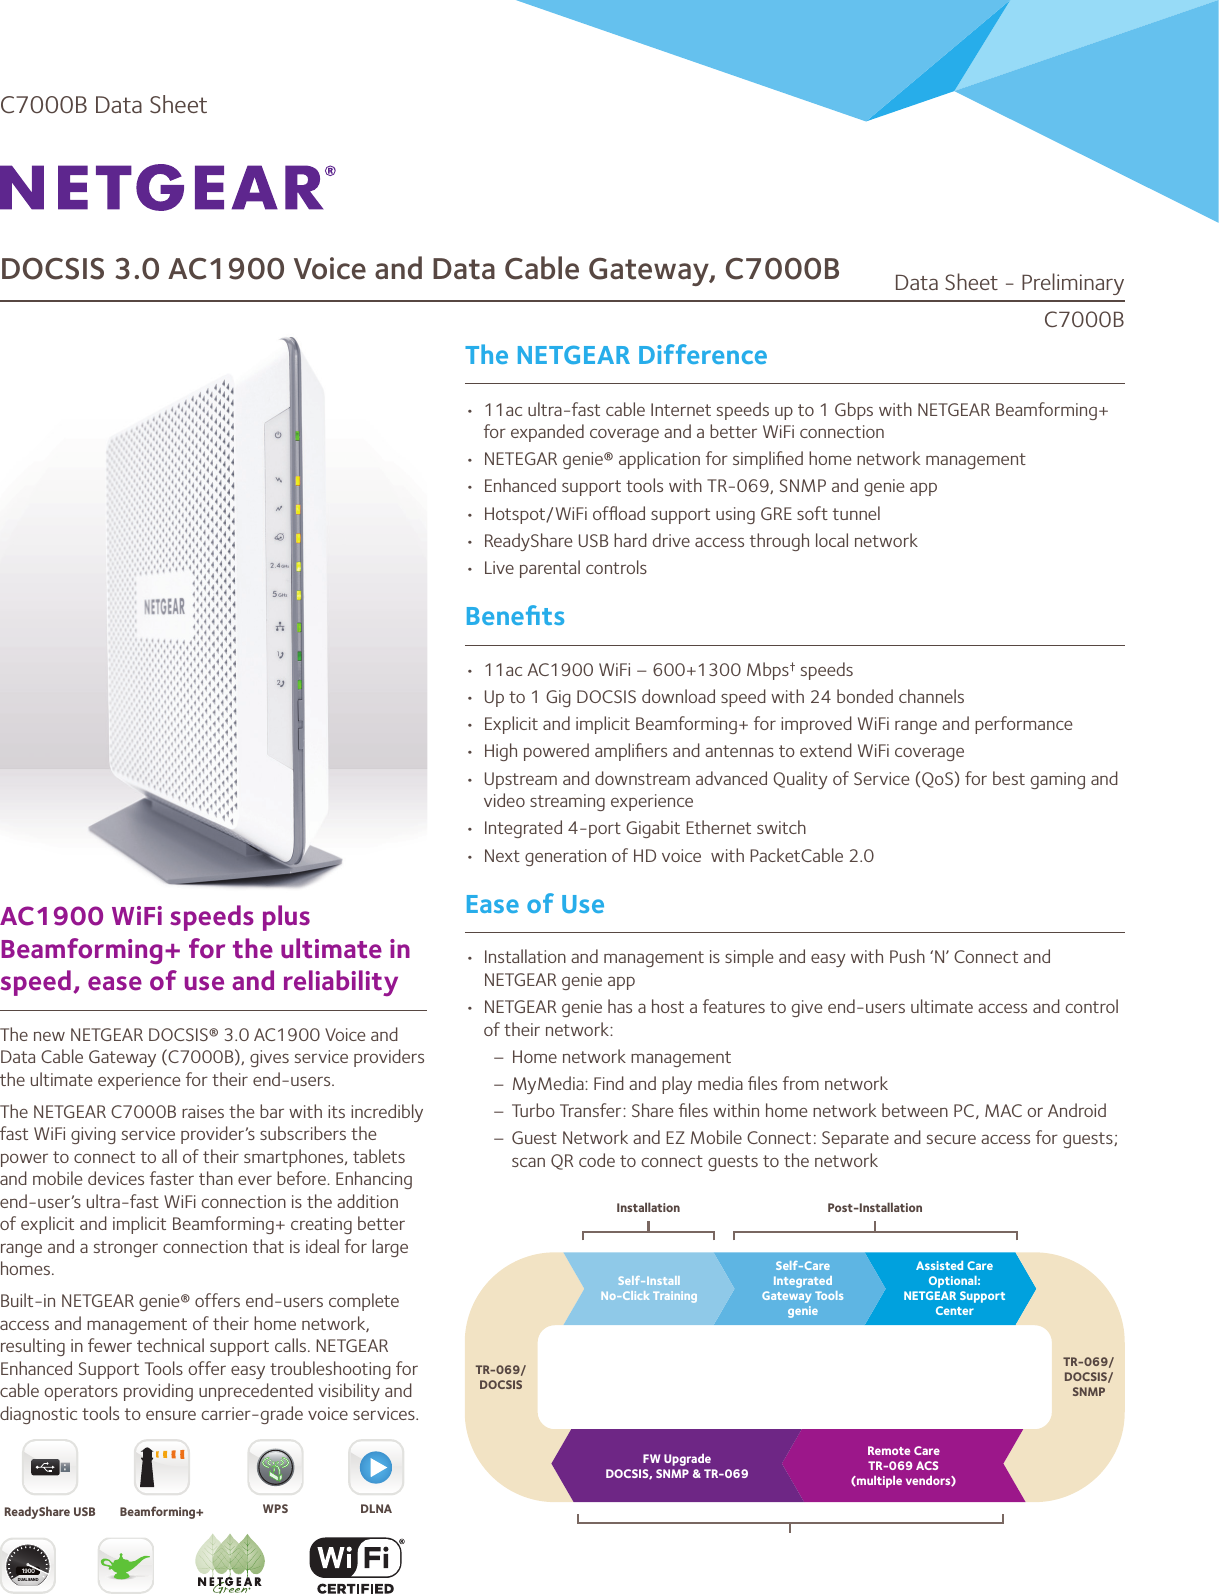 DOCSIS 3.0 AC1900 Voice and Data Cable Gateway, C7000BThe NETGEAR DifferenceAC1900 WiFi speeds plus Beamforming+ for the ultimate in speed, ease of use and reliabilityThe new NETGEAR DOCSIS® 3.0 AC1900 Voice and Data Cable Gateway (C7000B), gives service providers the ultimate experience for their end-users. The NETGEAR C7000B raises the bar with its incredibly fast WiFi giving service provider’s subscribers the power to connect to all of their smartphones, tablets and mobile devices faster than ever before. Enhancing end-user’s ultra-fast WiFi connection is the addition of explicit and implicit Beamforming+ creating better range and a stronger connection that is ideal for large homes. Built-in NETGEAR genie® offers end-users complete access and management of their home network, resulting in fewer technical support calls. NETGEAR Enhanced Support Tools offer easy troubleshooting for cable operators providing unprecedented visibility and diagnostic tools to ensure carrier-grade voice services.•  11ac ultra-fast cable Internet speeds up to 1 Gbps with NETGEAR Beamforming+ for expanded coverage and a better WiFi connection•  NETEGAR genie® application for simpliﬁed home network management•  Enhanced support tools with TR-069, SNMP and genie app•  Hotspot/WiFi ofﬂoad support using GRE soft tunnel•  ReadyShare USB hard drive access through local network•  Live parental controlsBeneﬁts•  11ac AC1900 WiFi – 600+1300 Mbps† speeds•  Up to 1 Gig DOCSIS download speed with 24 bonded channels•  Explicit and implicit Beamforming+ for improved WiFi range and performance•  High powered ampliﬁers and antennas to extend WiFi coverage•  Upstream and downstream advanced Quality of Service (QoS) for best gaming and video streaming experience•  Integrated 4-port Gigabit Ethernet switch•  Next generation of HD voice  with PacketCable 2.0Ease of Use•  Installation and management is simple and easy with Push ‘N’ Connect and NETGEAR genie app•  NETGEAR genie has a host a features to give end-users ultimate access and control of their network:– Home network management– MyMedia: Find and play media ﬁles from network– Turbo Transfer: Share ﬁles within home network between PC, MAC or Android– Guest Network and EZ Mobile Connect: Separate and secure access for guests; scan QR code to connect guests to the networkC7000BData Sheet - PreliminaryC7000B Data SheetSelf-InstallNo-Click TrainingFW UpgradeDOCSIS, SNMP &amp; TR-069Remote CareTR-069 ACS(multiple vendors)TR-069/DOCSIS/SNMPInstallation Post-InstallationTR-069/DOCSISSelf-CareIntegratedGateway ToolsgenieAssisted CareOptional:NETGEAR Support CenterDUAL BAND1900ReadyShare USB Beamforming+ DLNAWPS